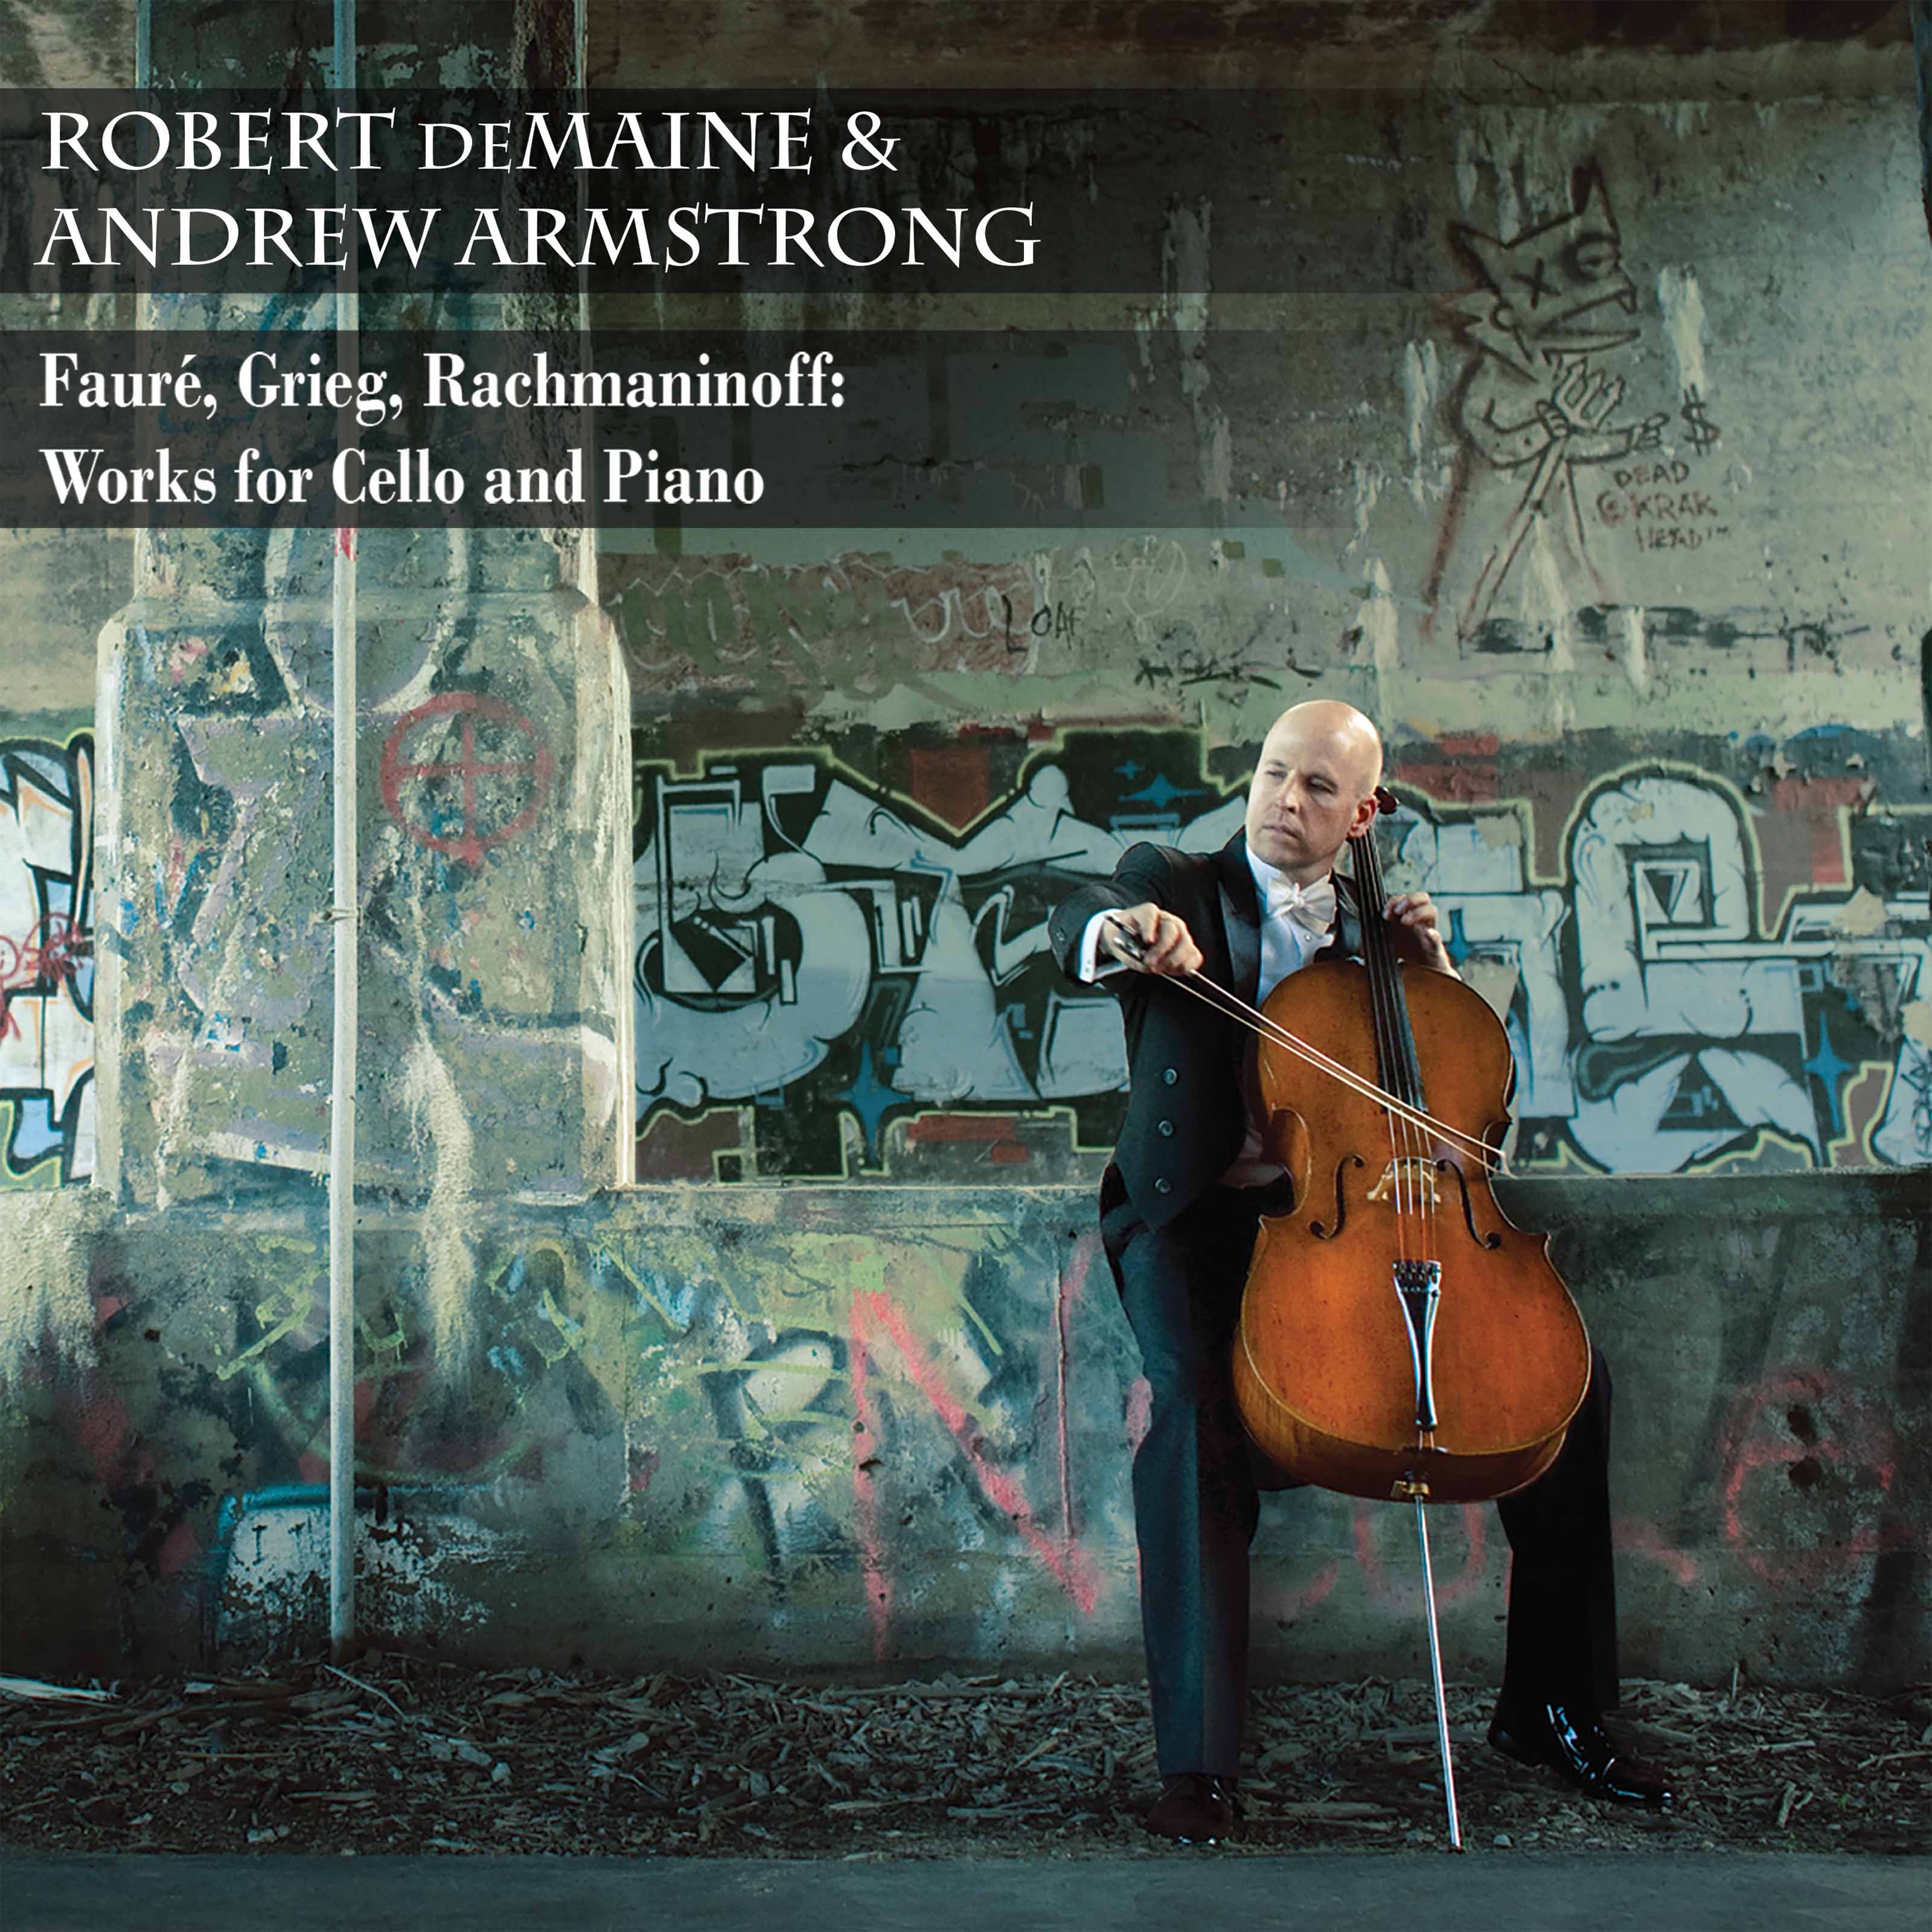 Robert deMaine & Andrew Armstrong - Faure, Greig & Rachmaninoff: Works for Cello & Piano (2017) [Qobuz FLAC 24bit/44,1kHz]